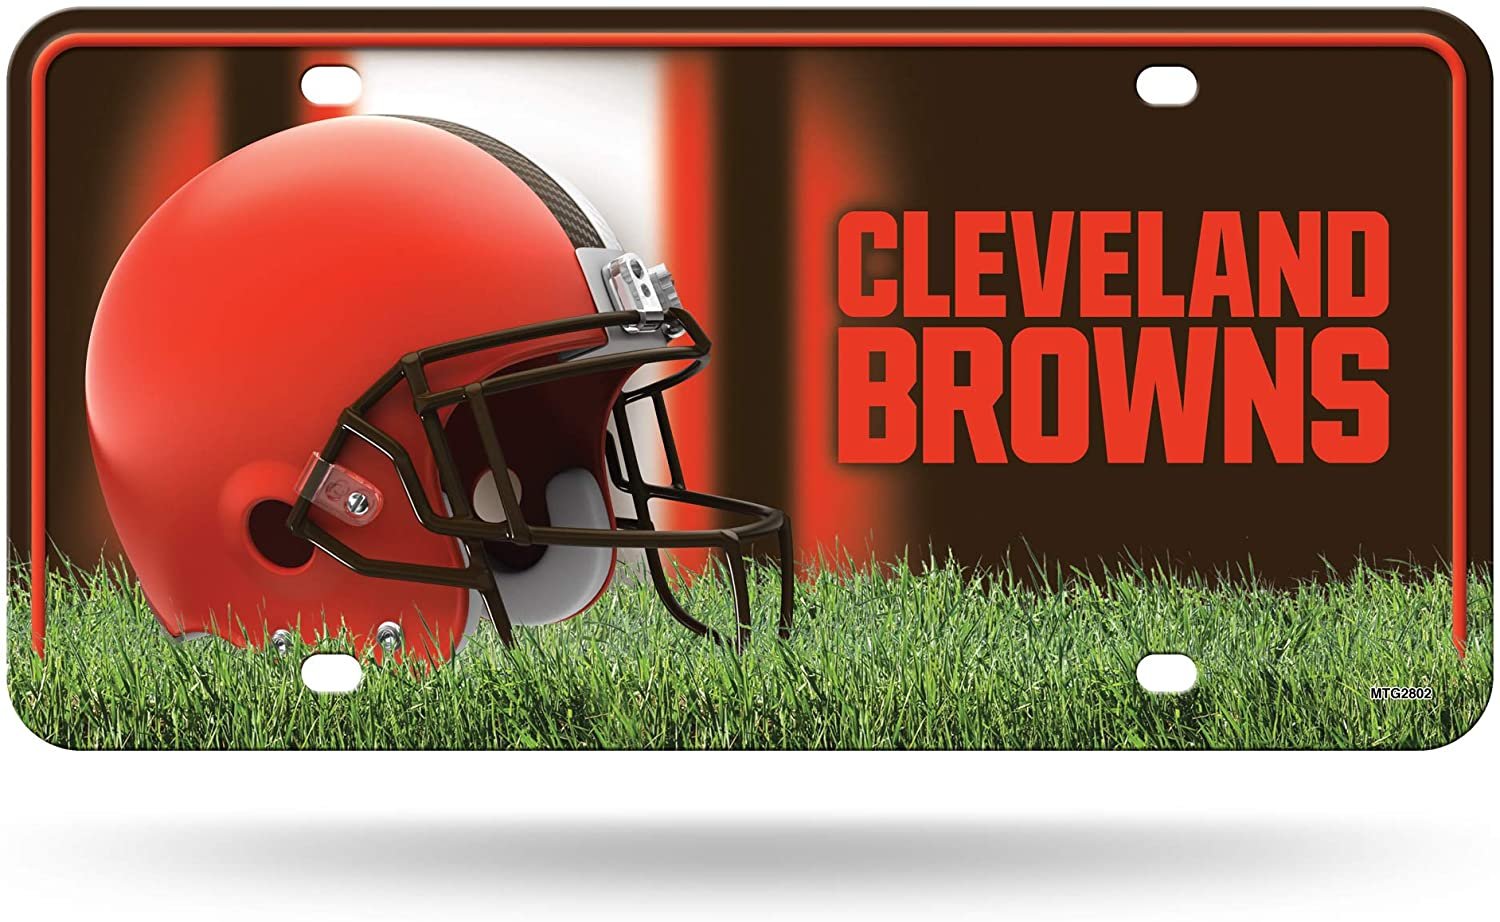 Cleveland Browns Metal Auto Tag License Plate, Helmet Design, 6x12 Inch